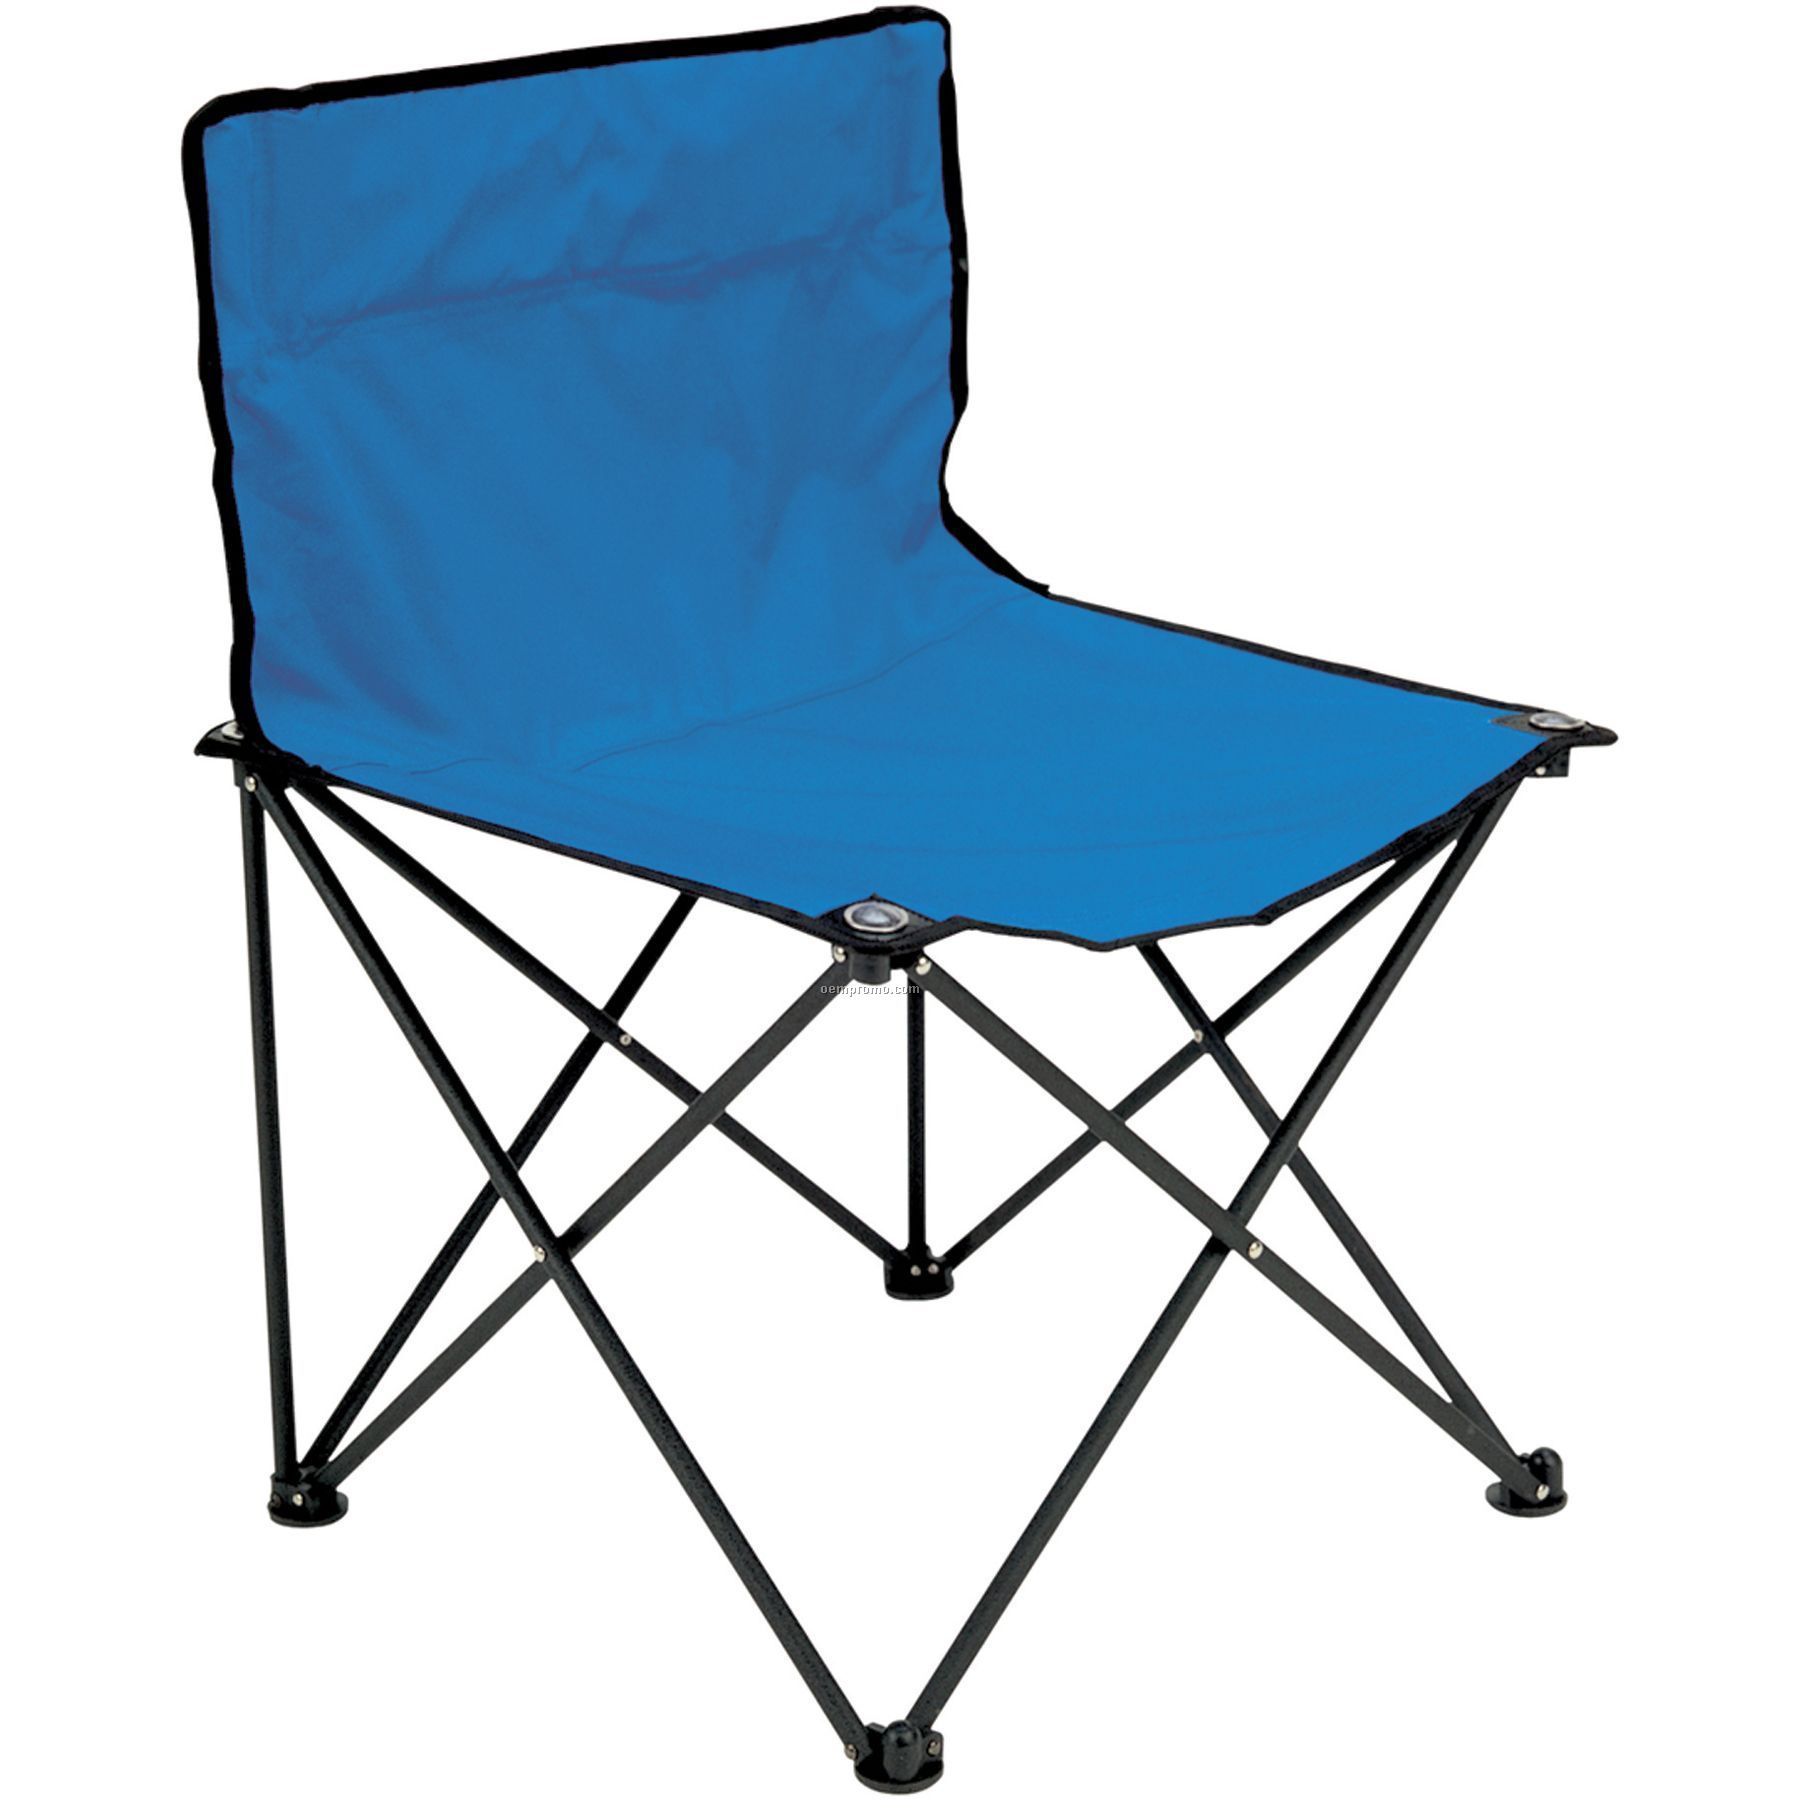 Collapsible Folding Chair W/ Carry Bag